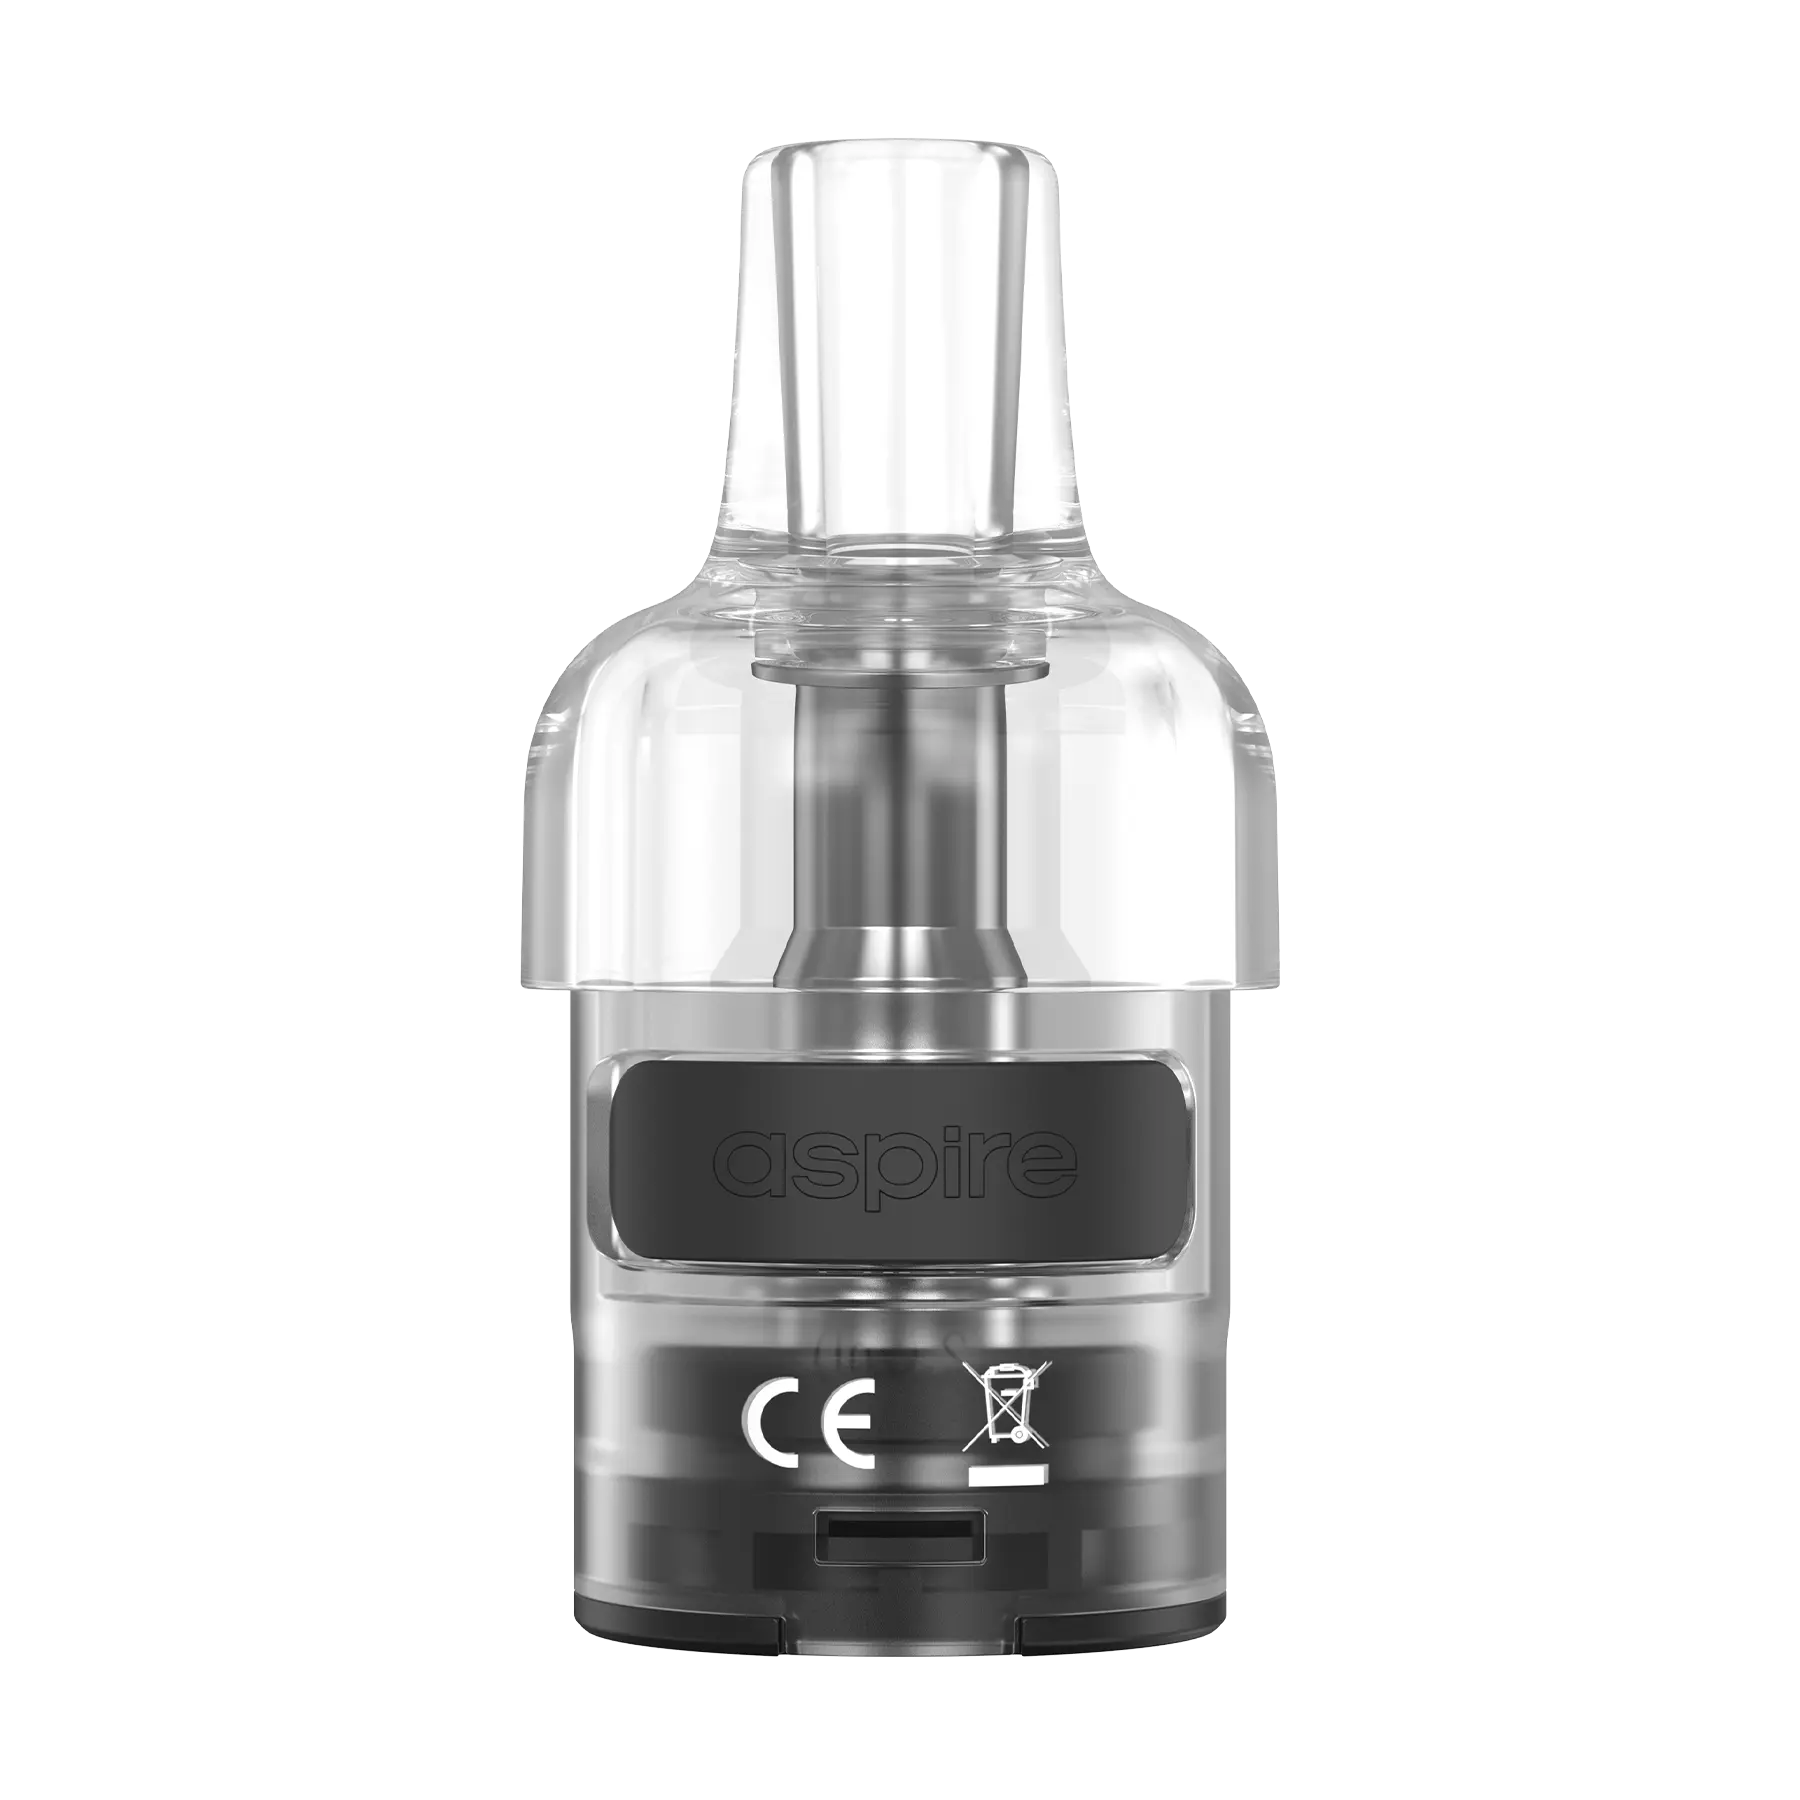 Aspire UK Cyber G TG Replacement 0.8 ohm Pod - 2 Pack - XL